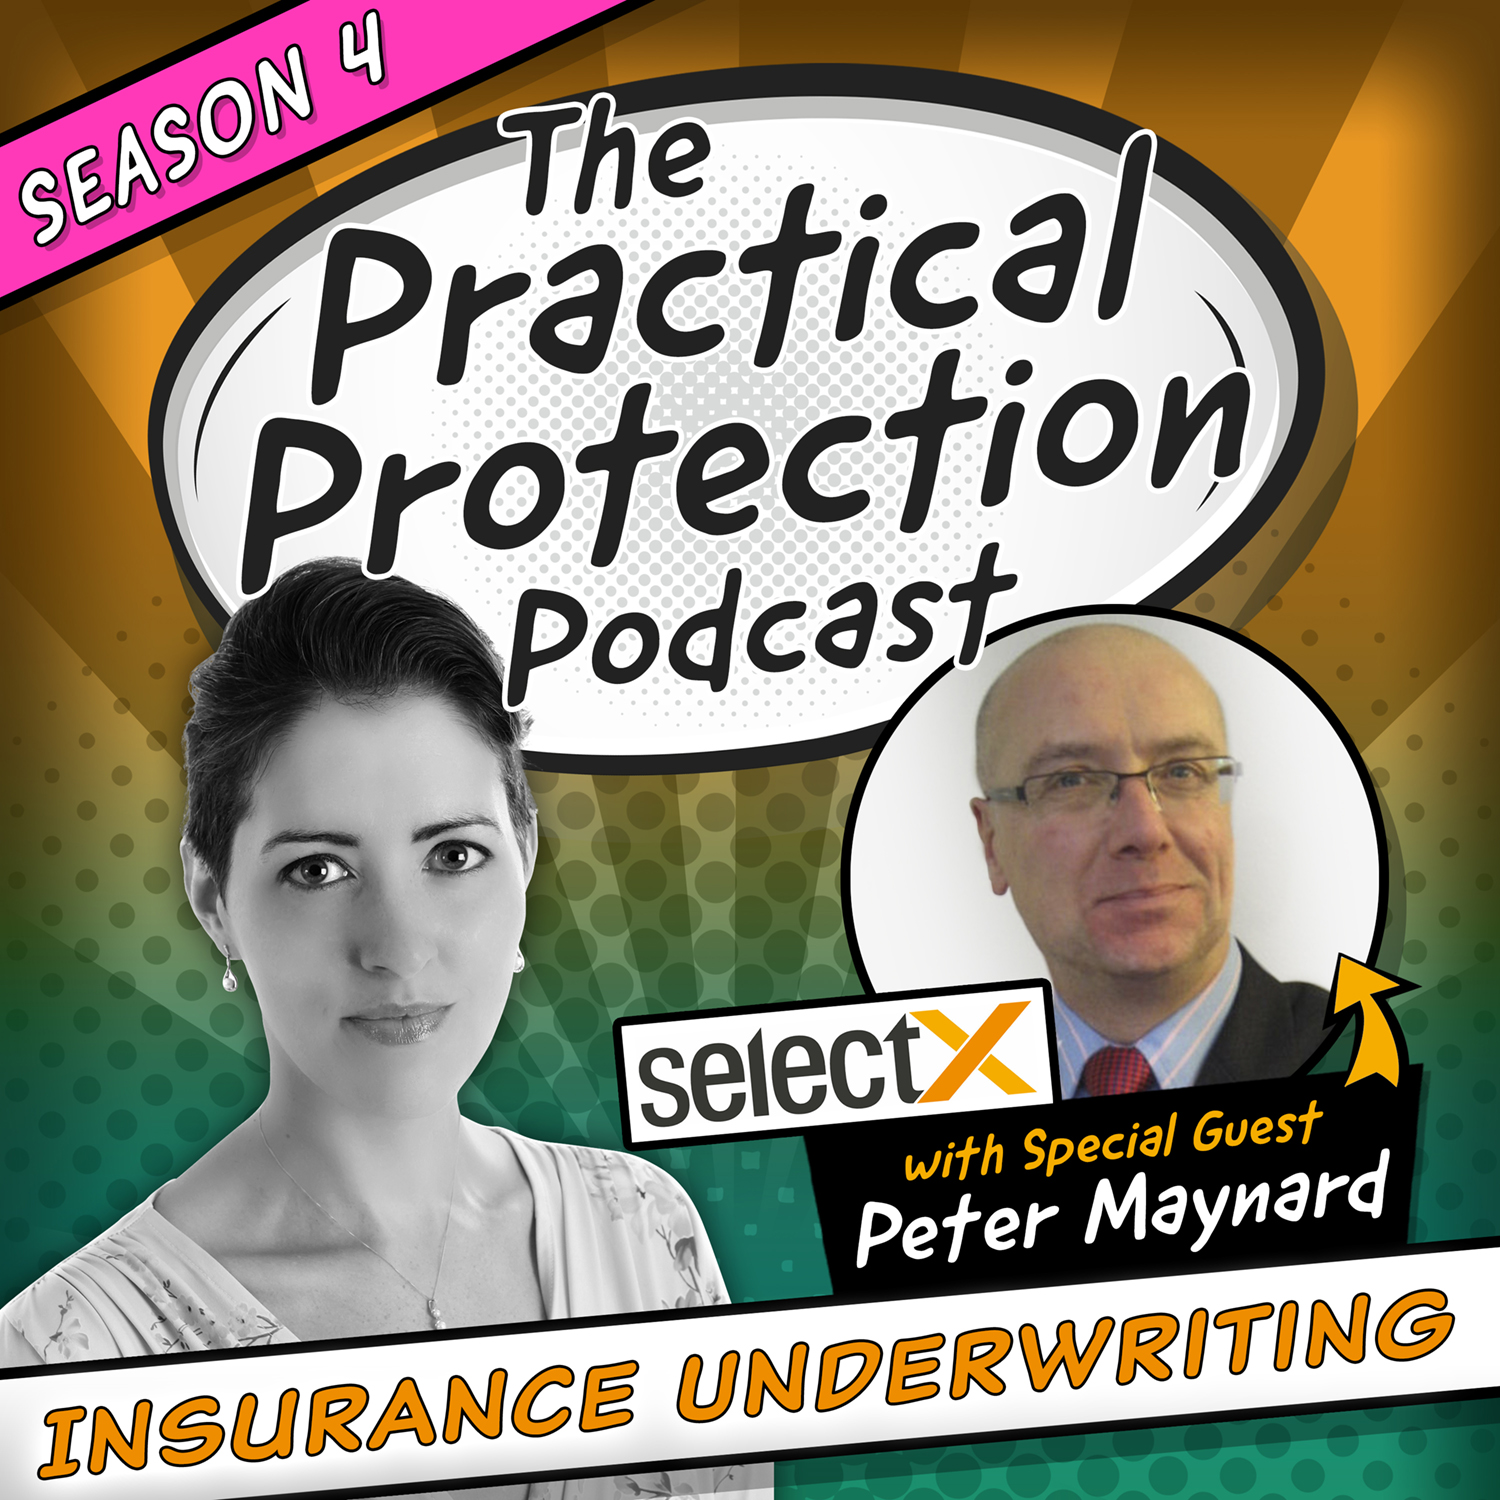 Artwork for podcast The Practical Protection Podcast